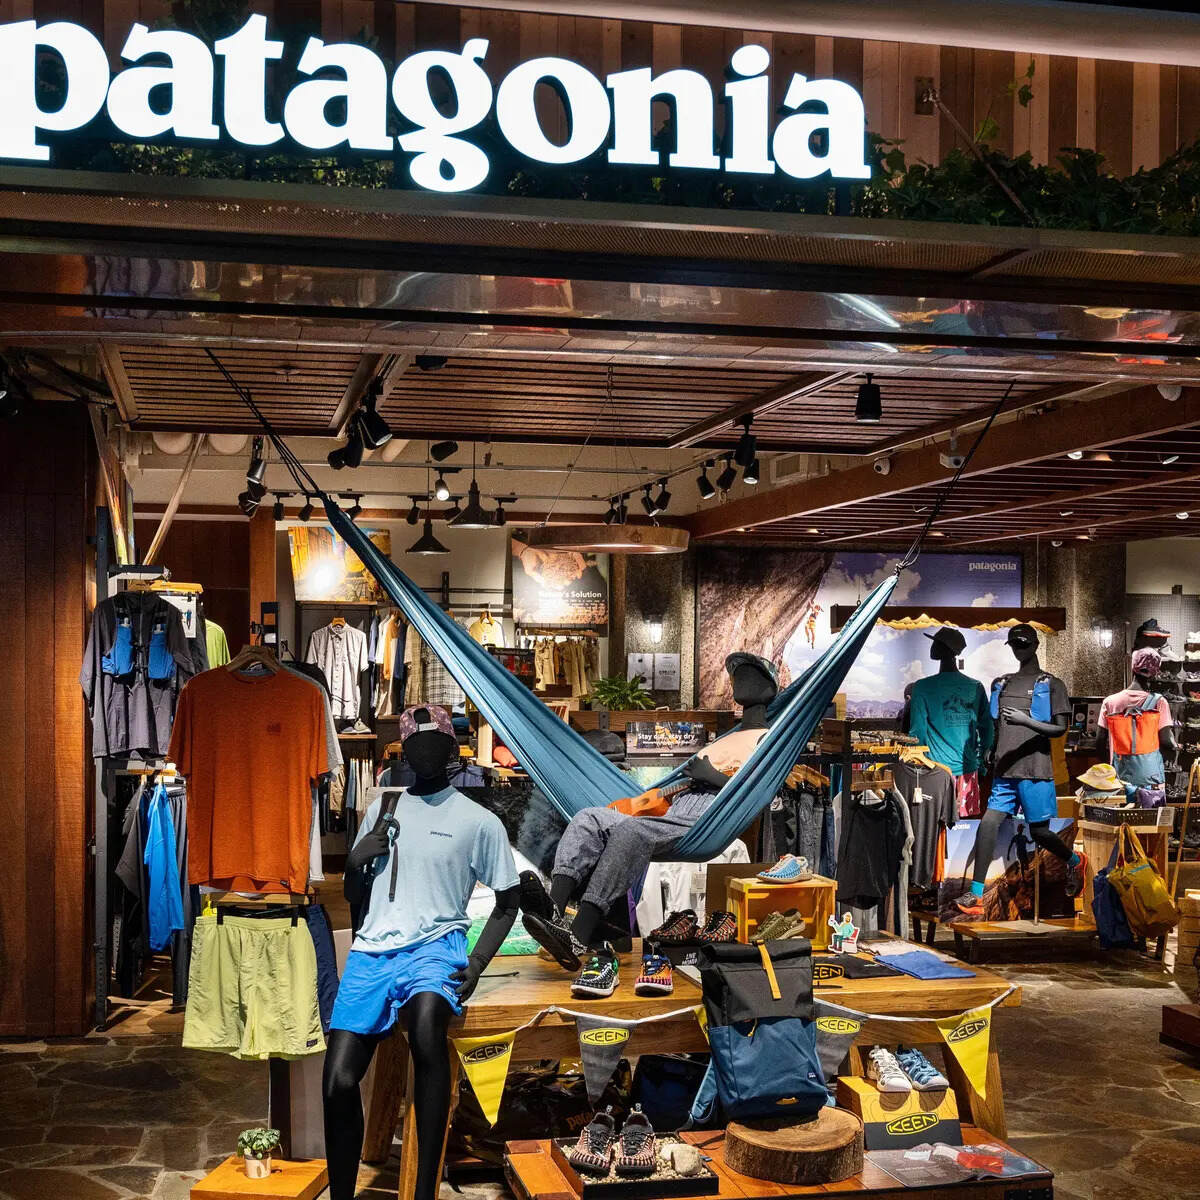 Patagonia Outlet: Everything You Need To Know About The Shopping Experience